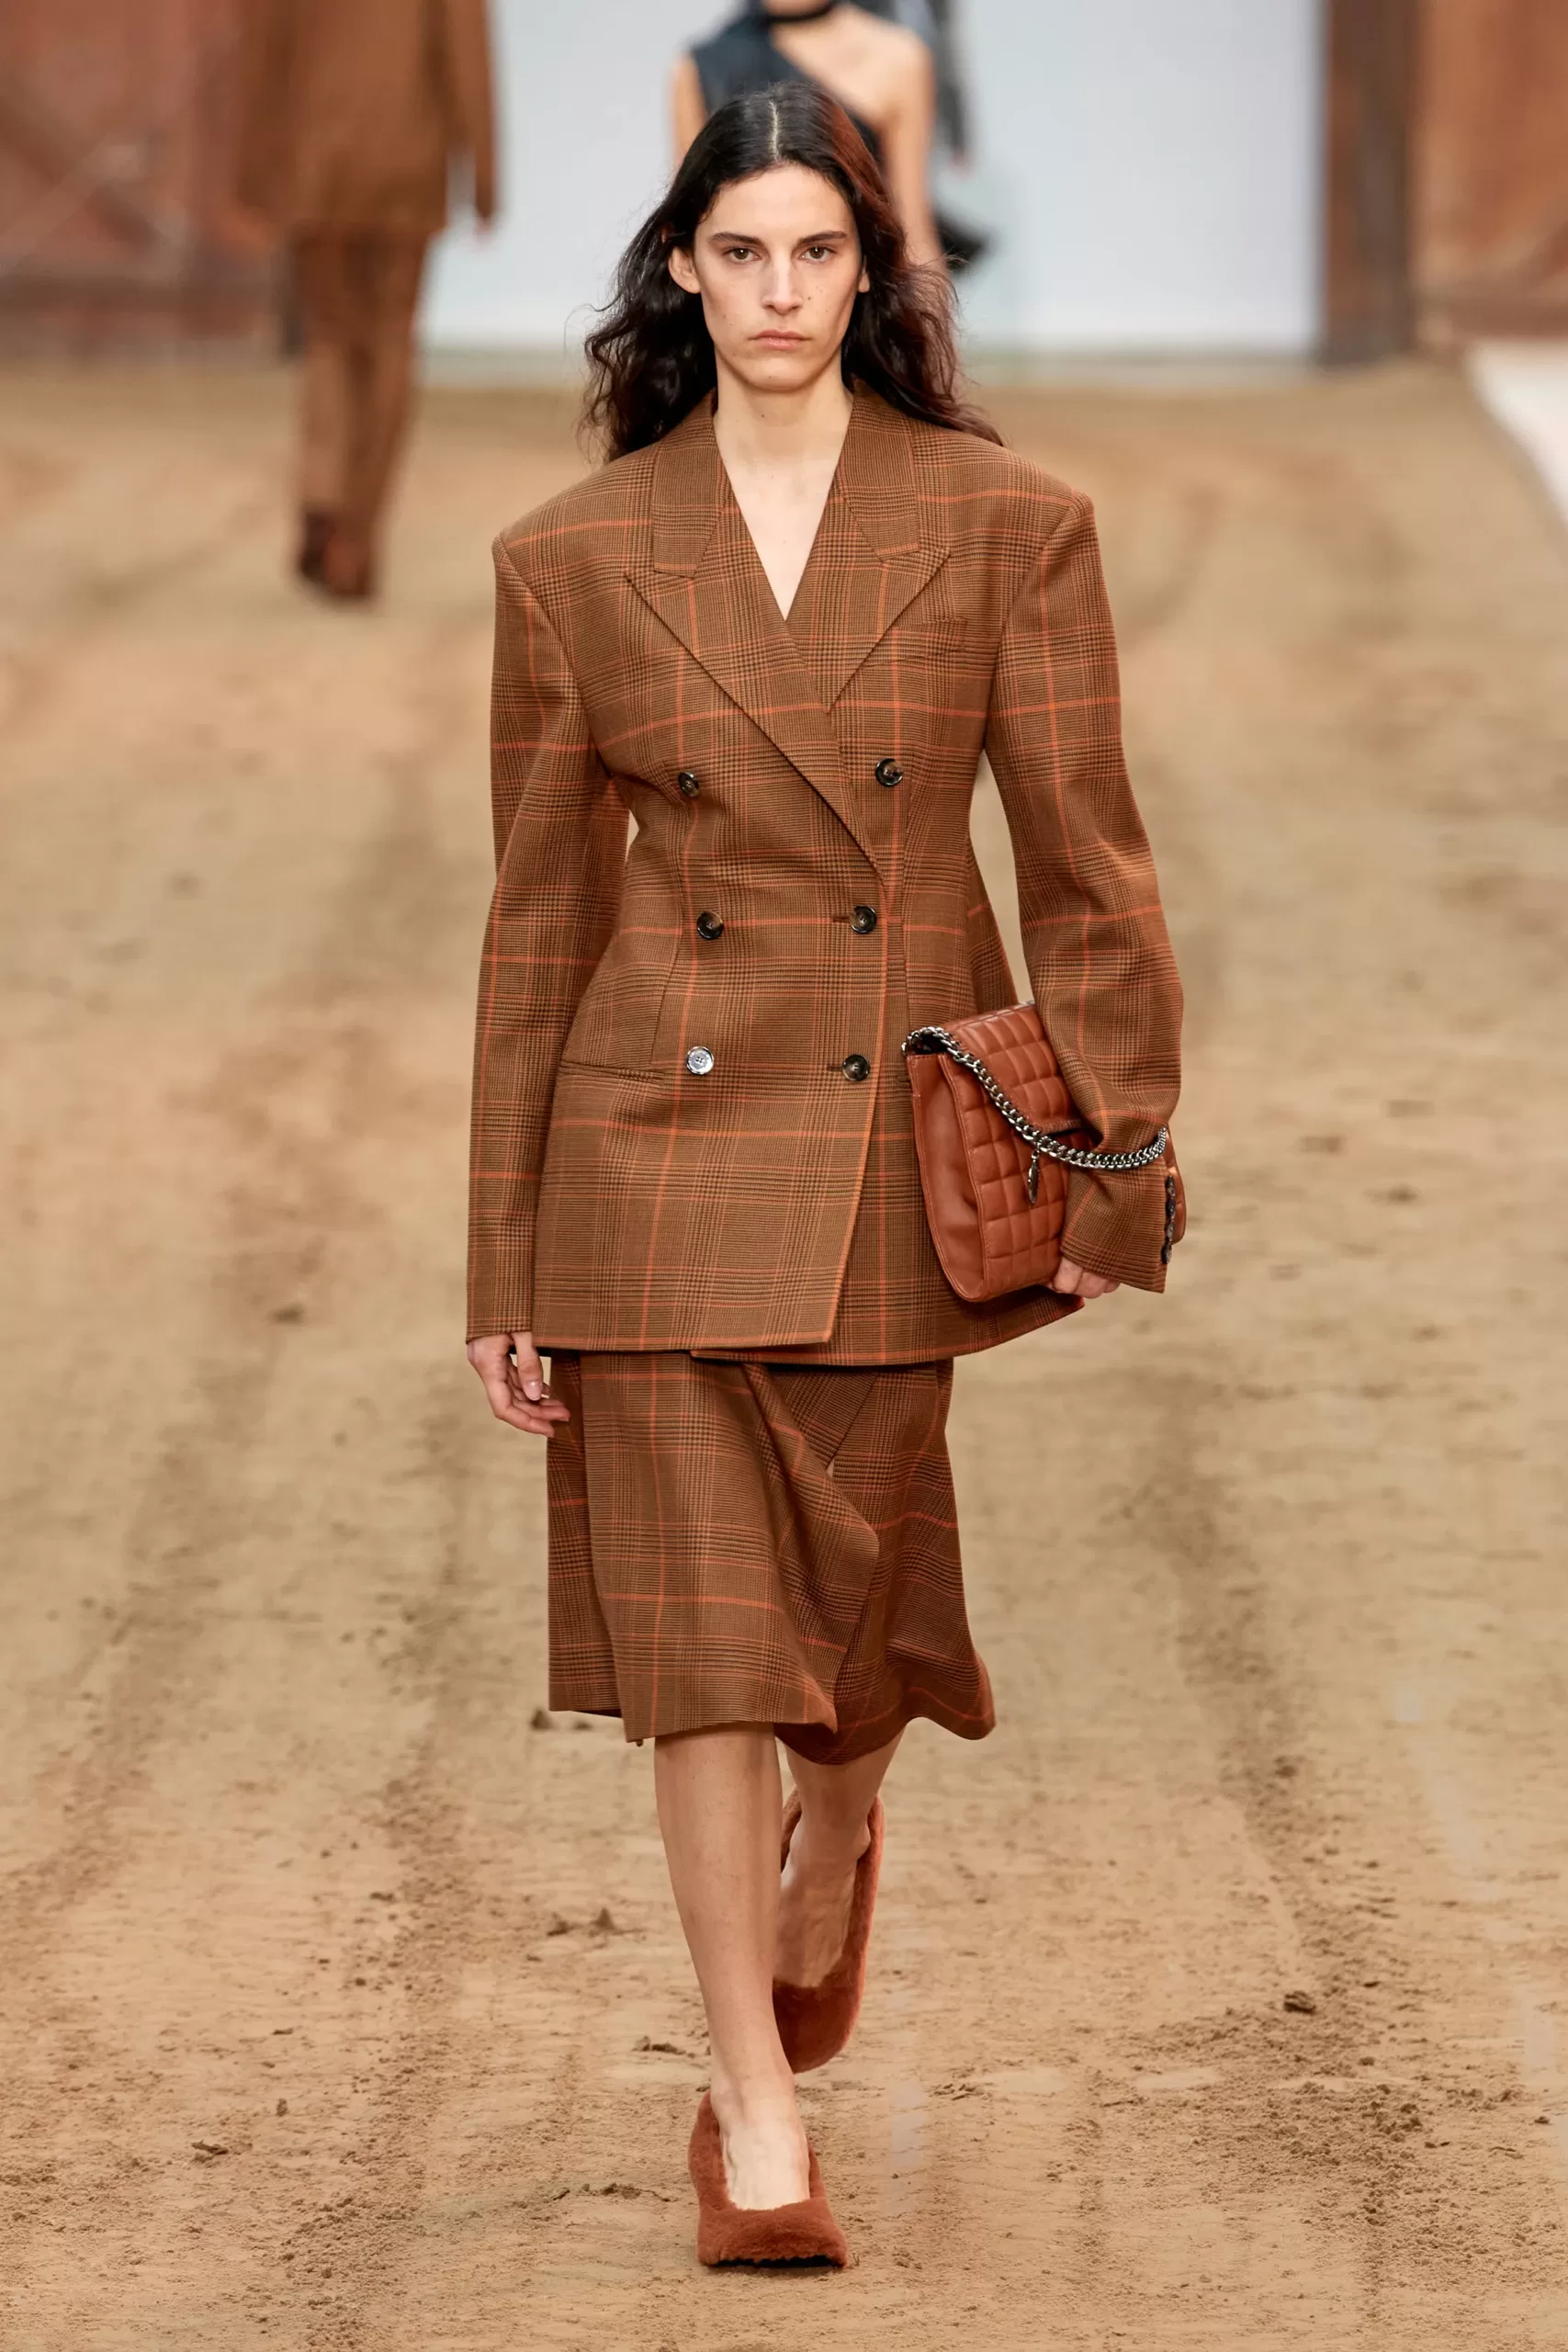 Stella McCartney Fall 2020 Ready-to-Wear Collection